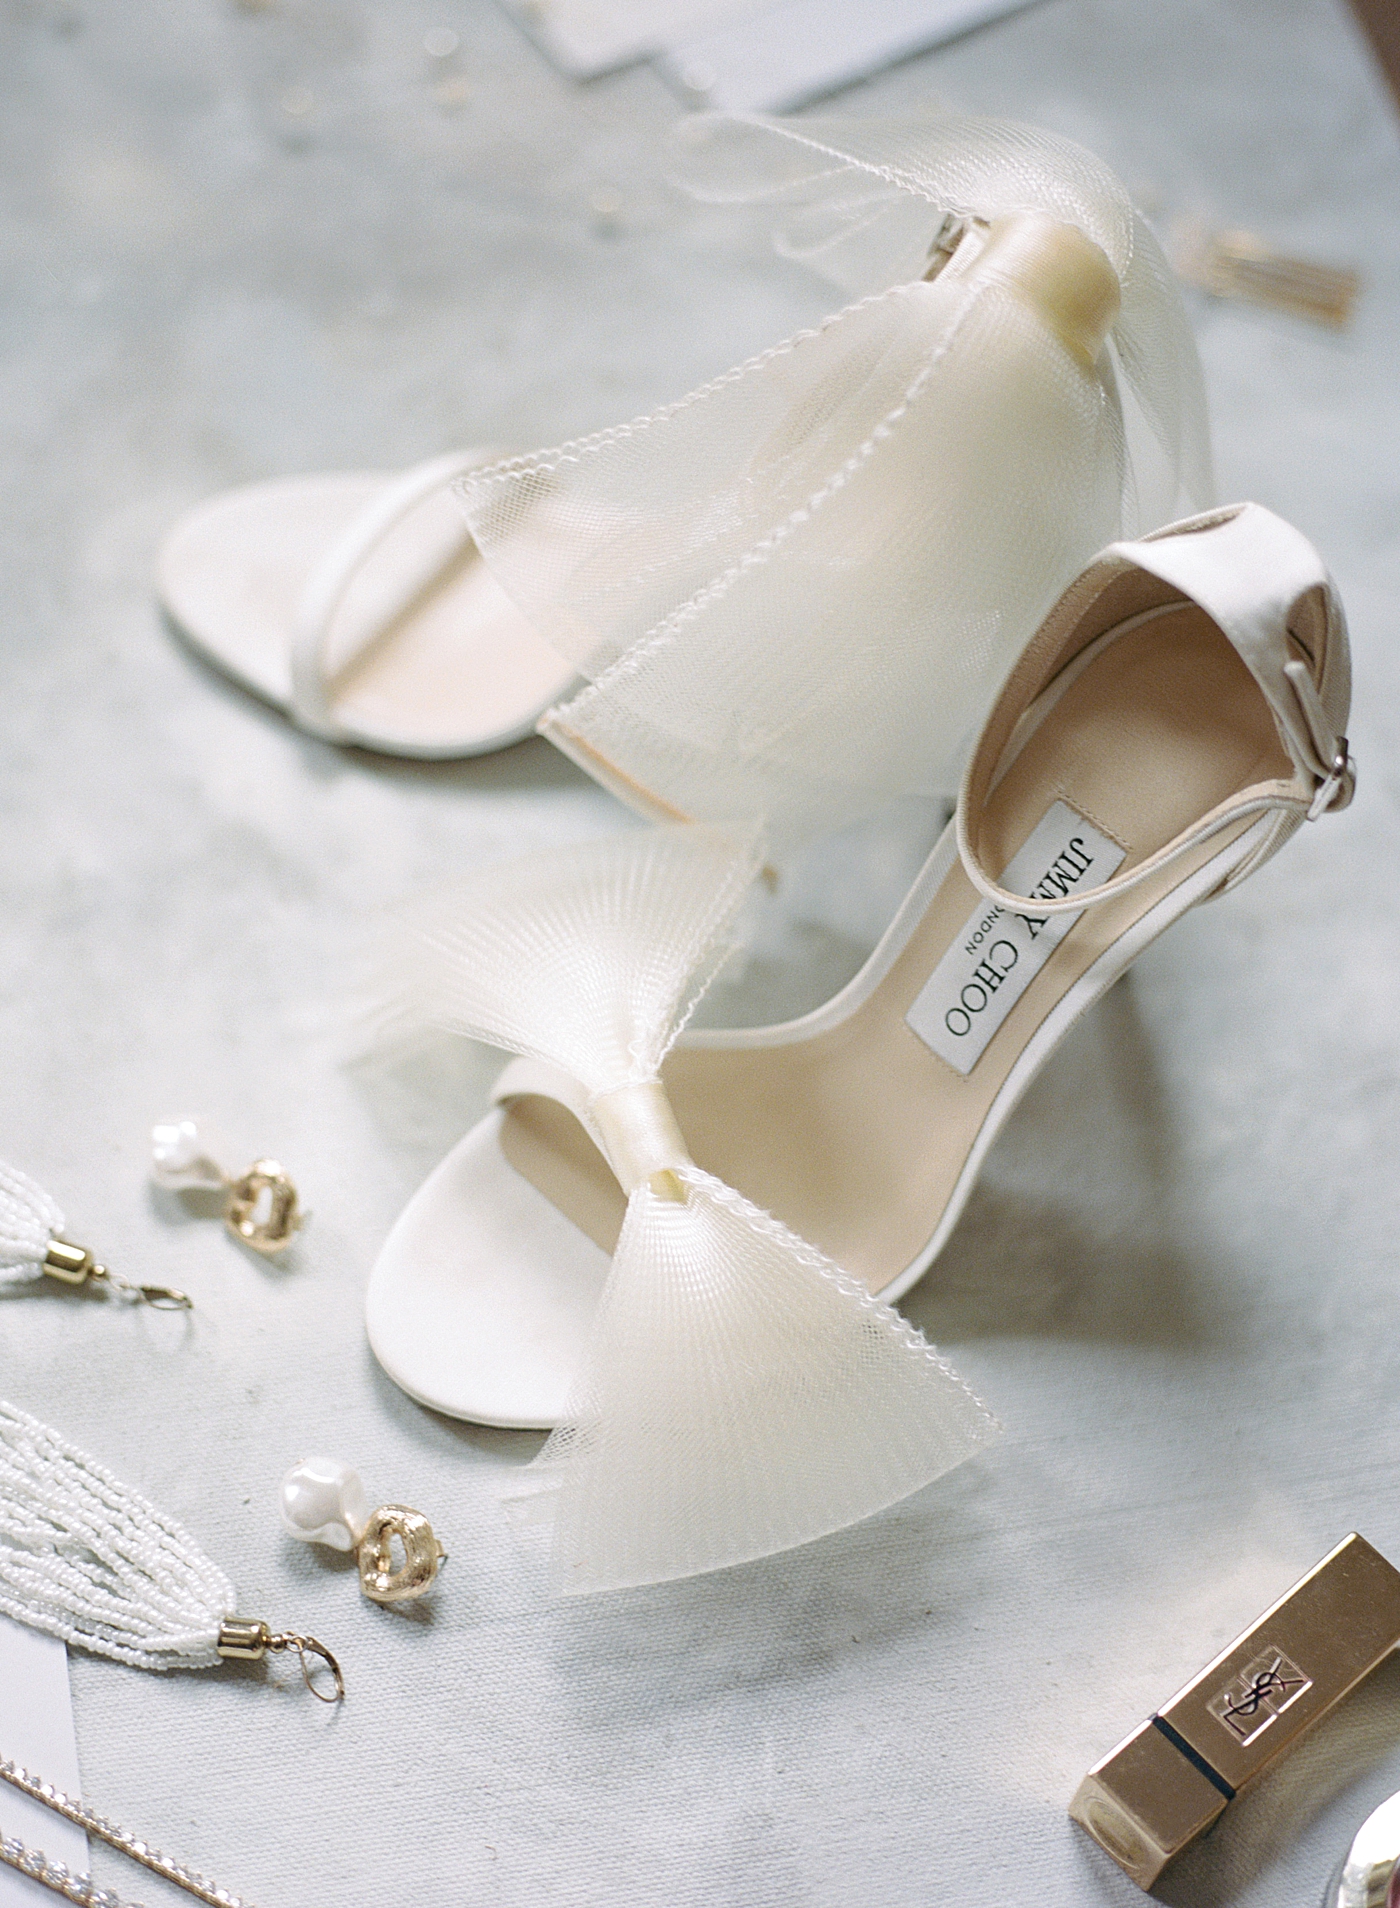 White Jimmy Choo heels and YSL lipstick | Photo by Hope Helmuth Photography